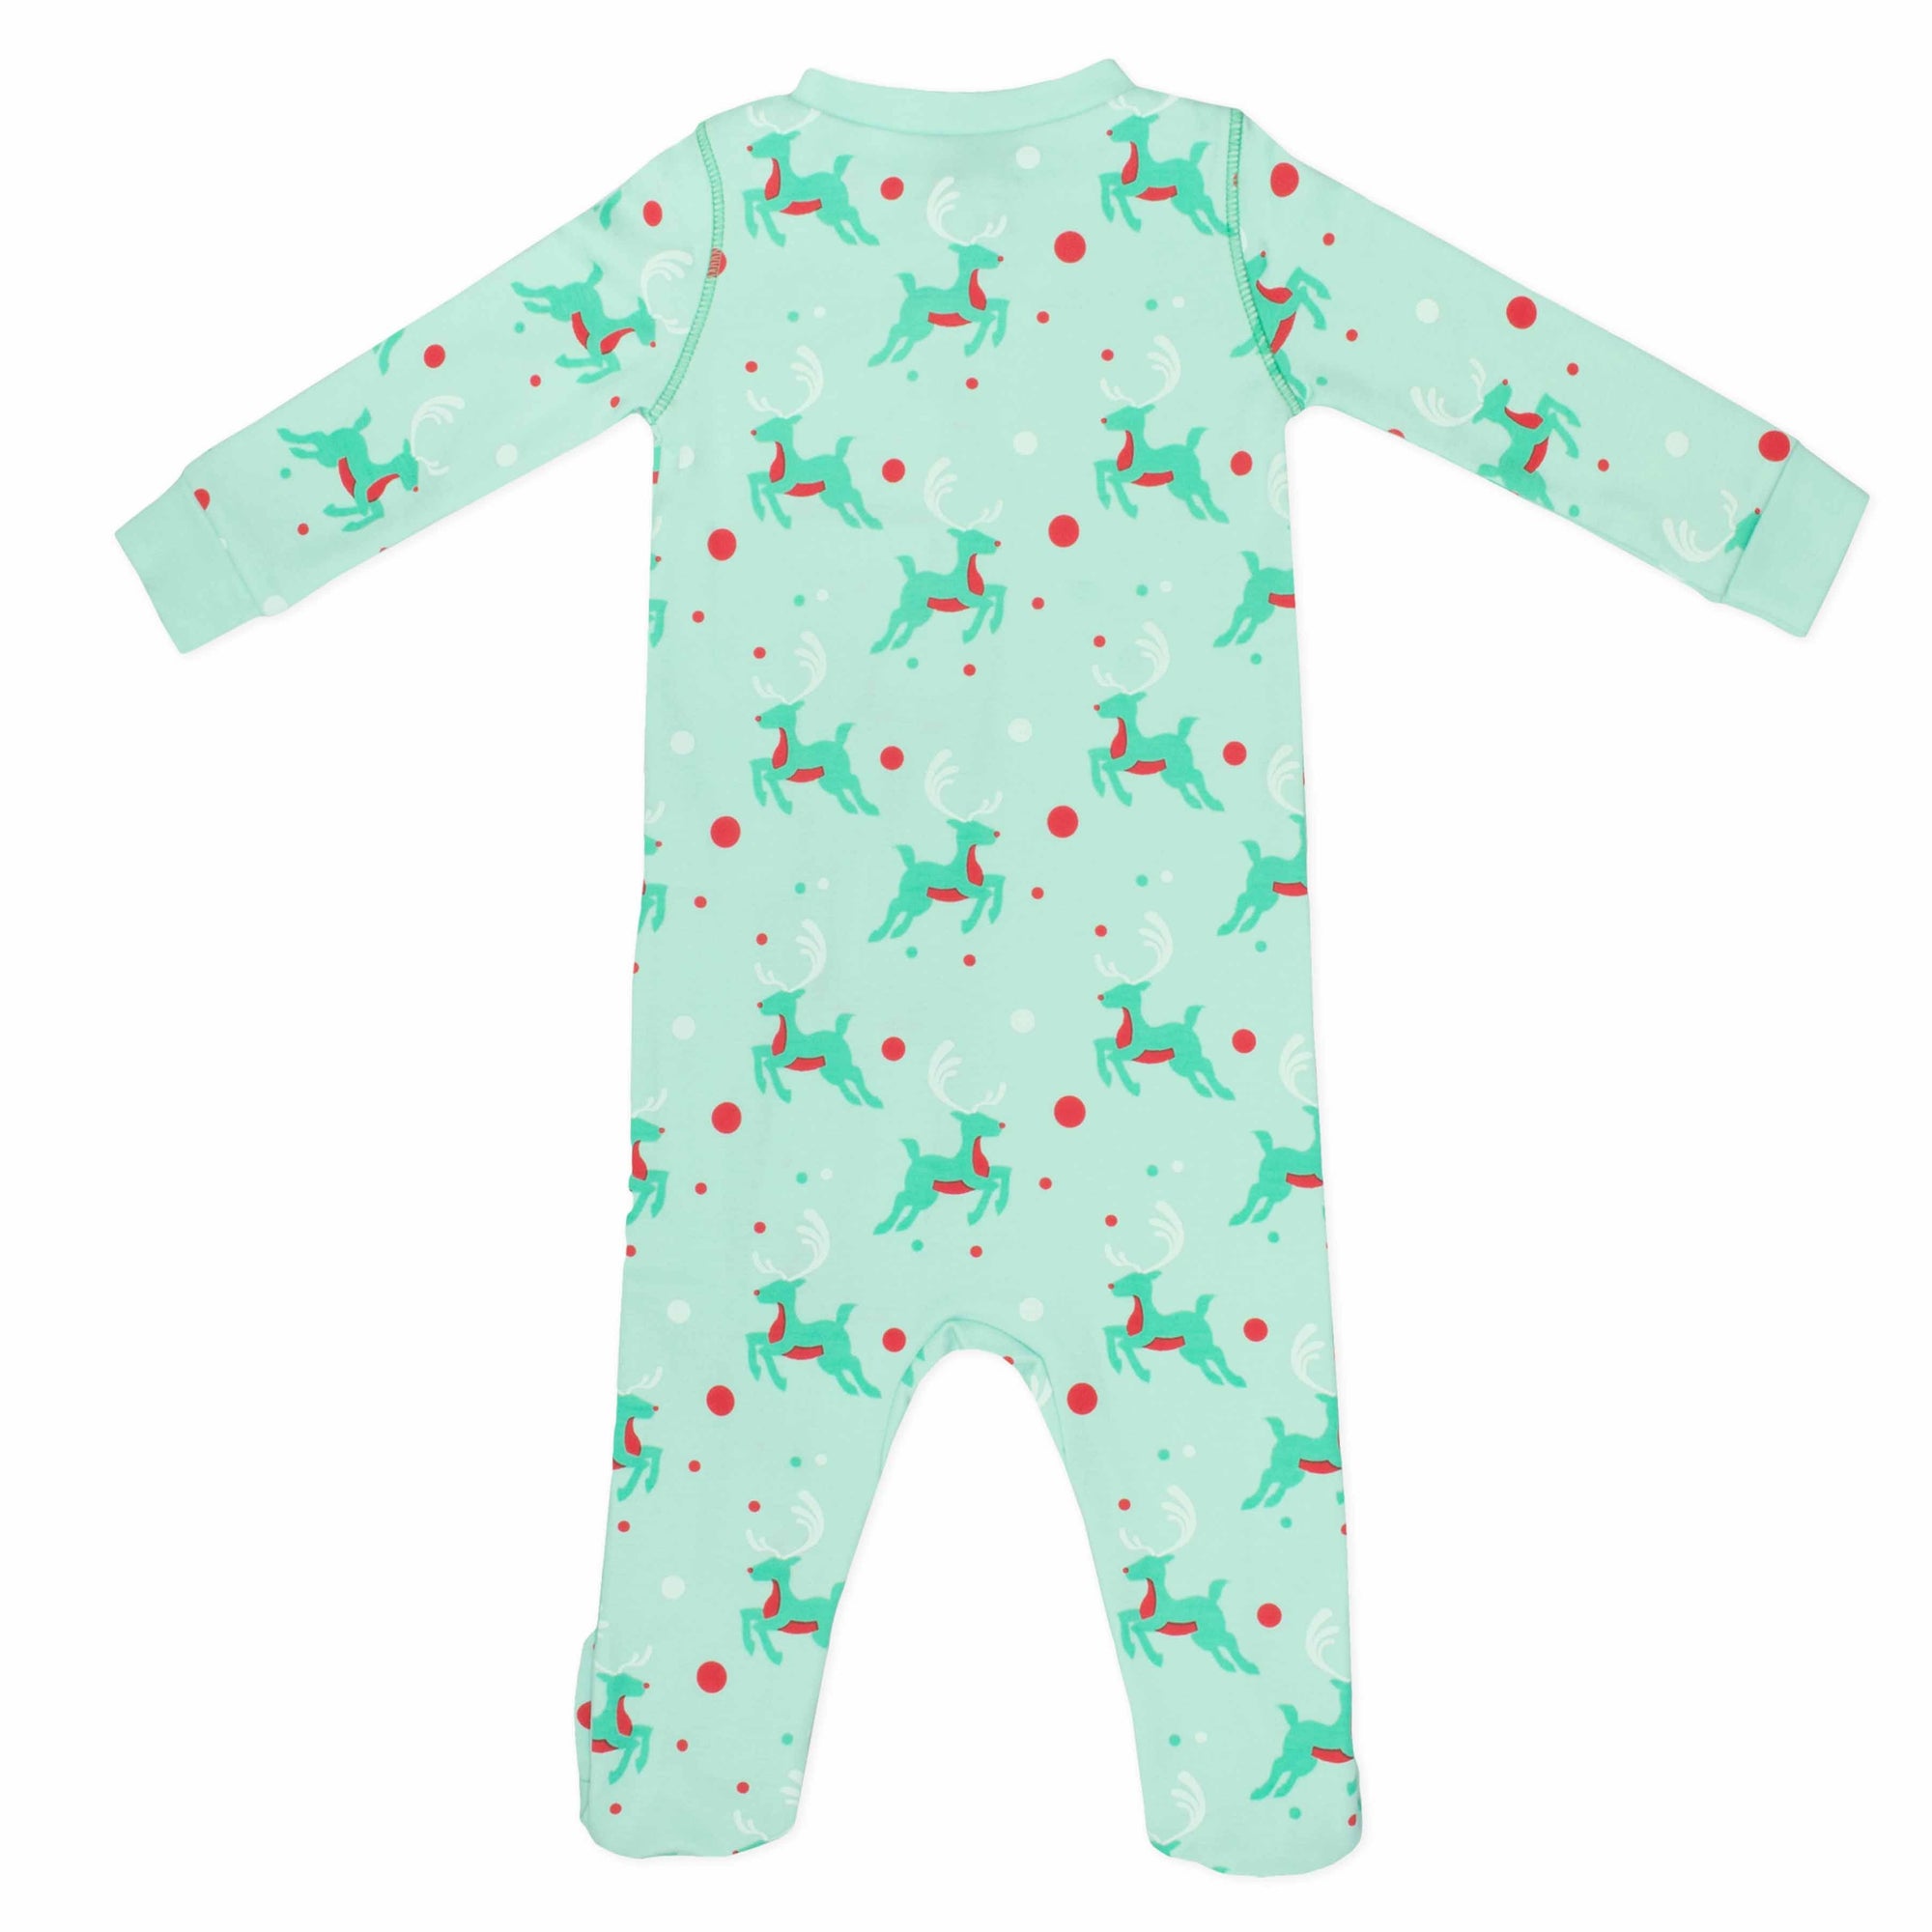 Mint green footed pajama with Christmas Reindeer pattern made in pima cotton - back view